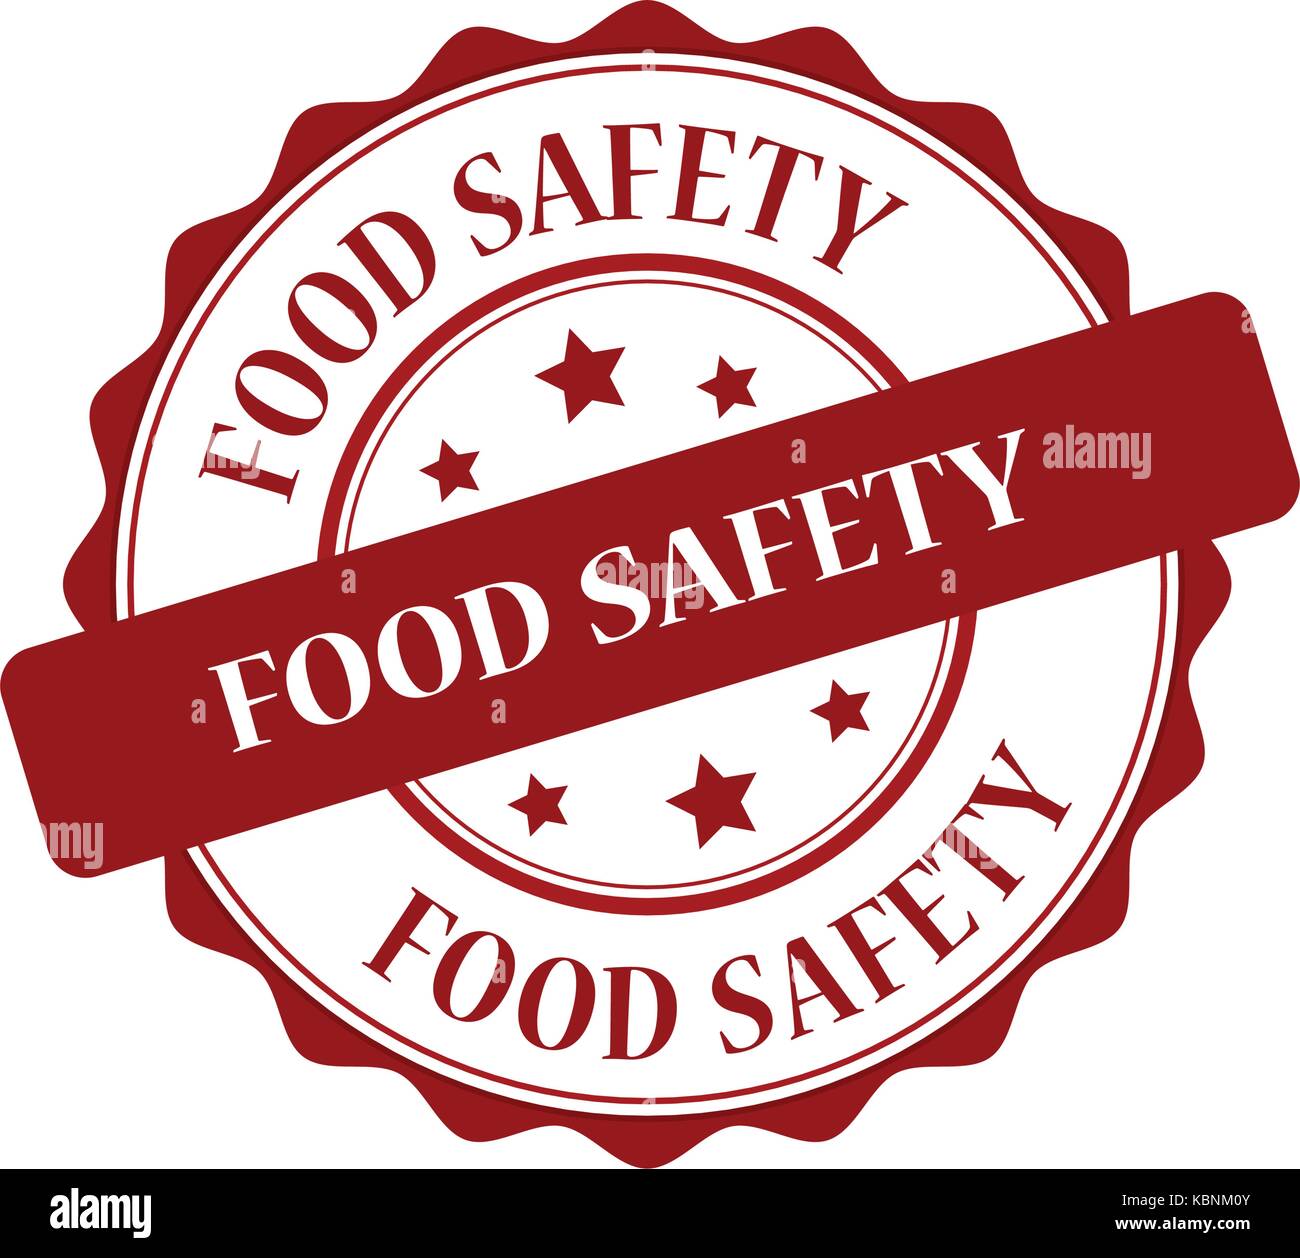 Food safety red stamp illustration Stock Vector